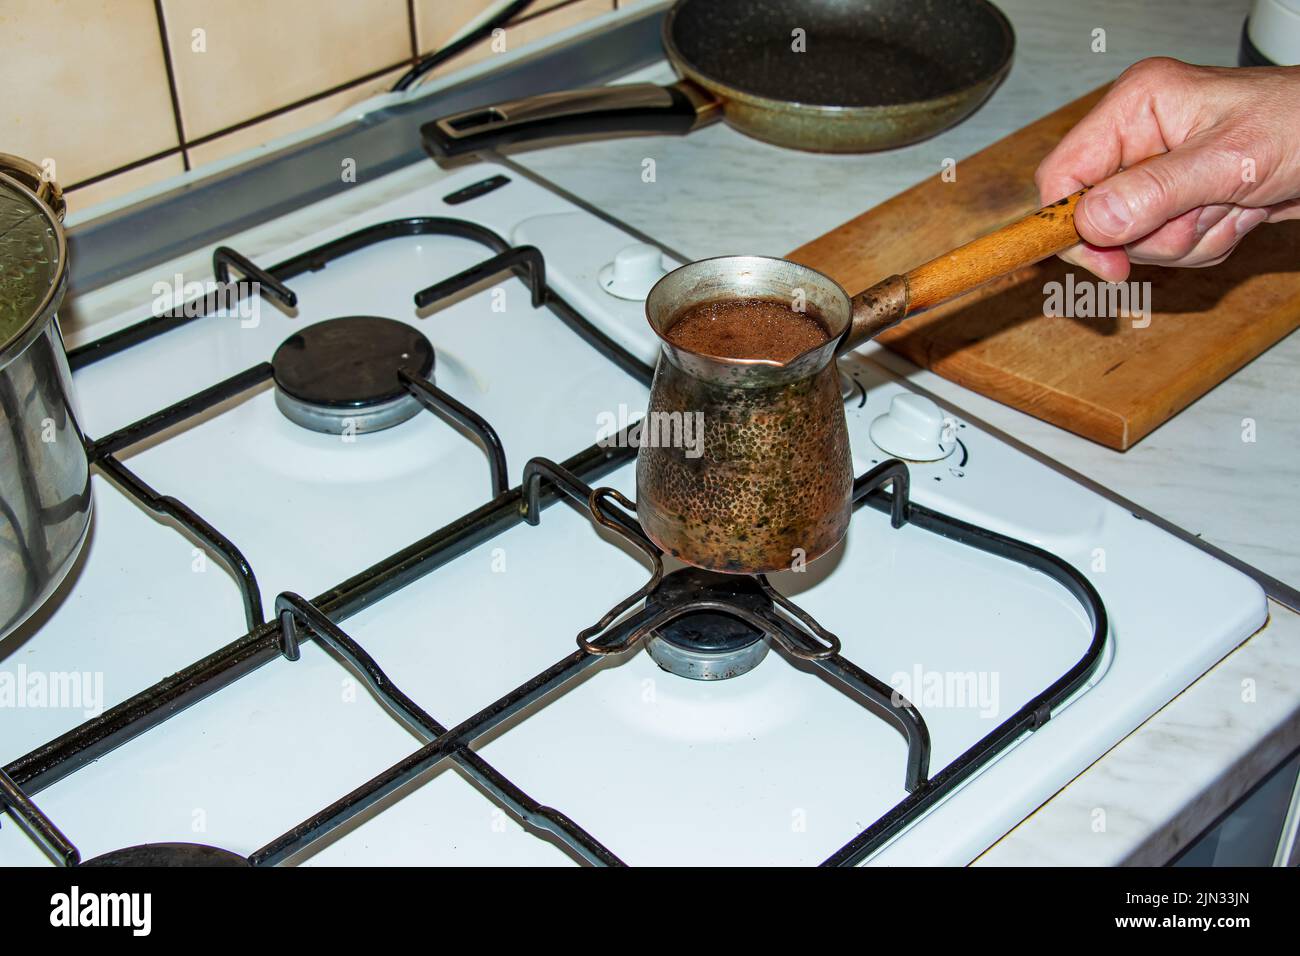 Ground coffee is brewed in a copper cezve on a gas stove. Stock Photo